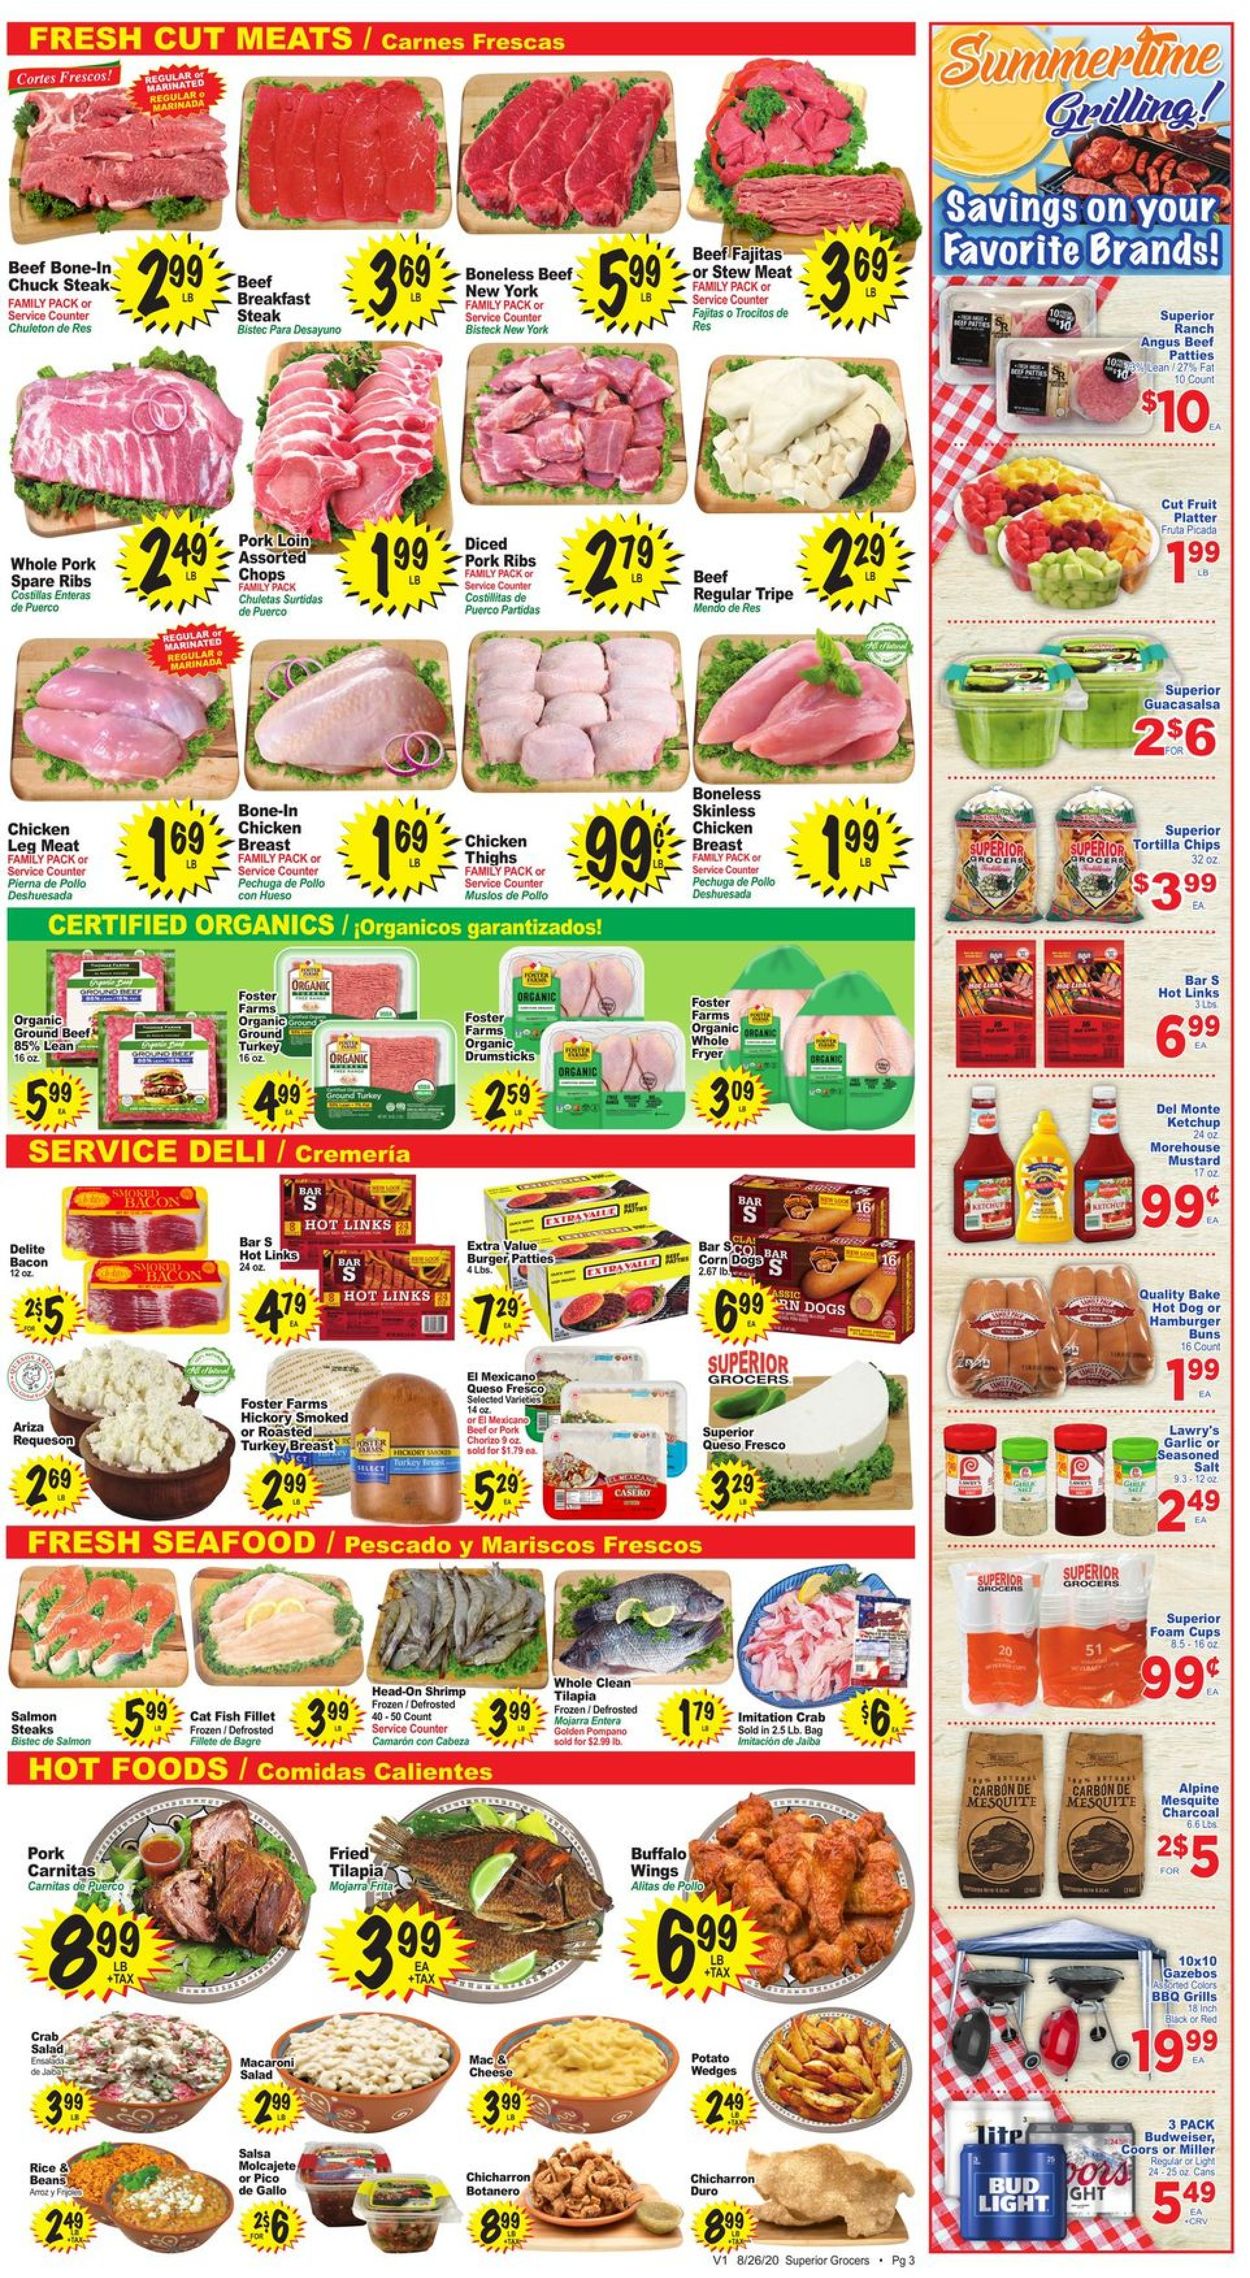 Catalogue Superior Grocers from 08/26/2020